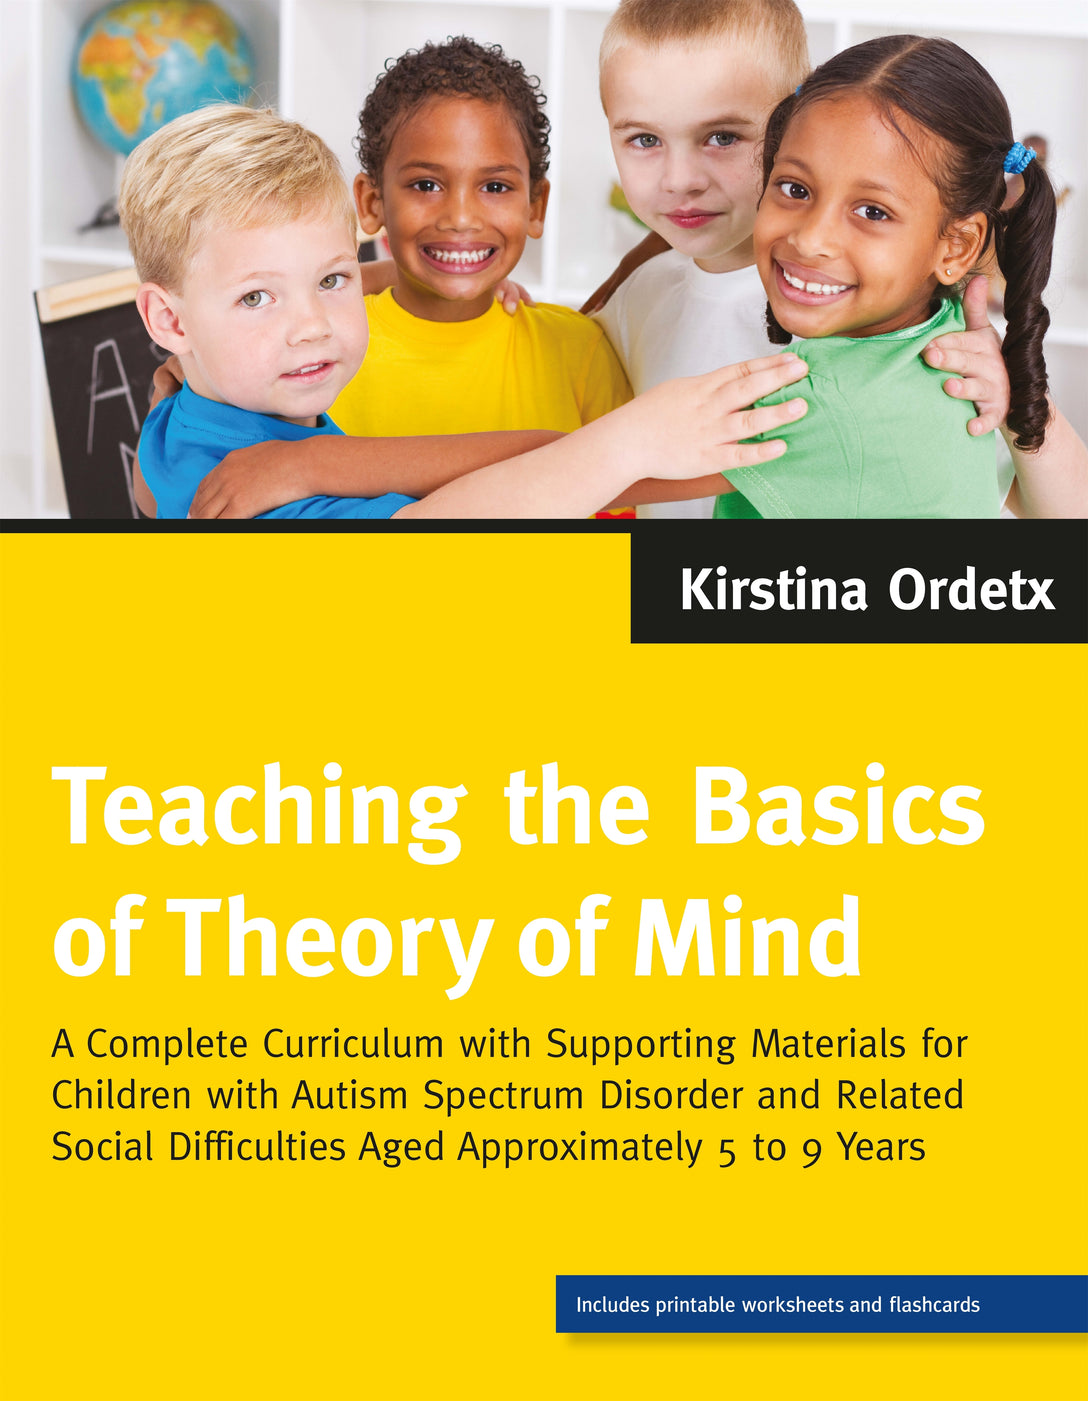 Teaching the Basics of Theory of Mind by Kirstina Ordetx